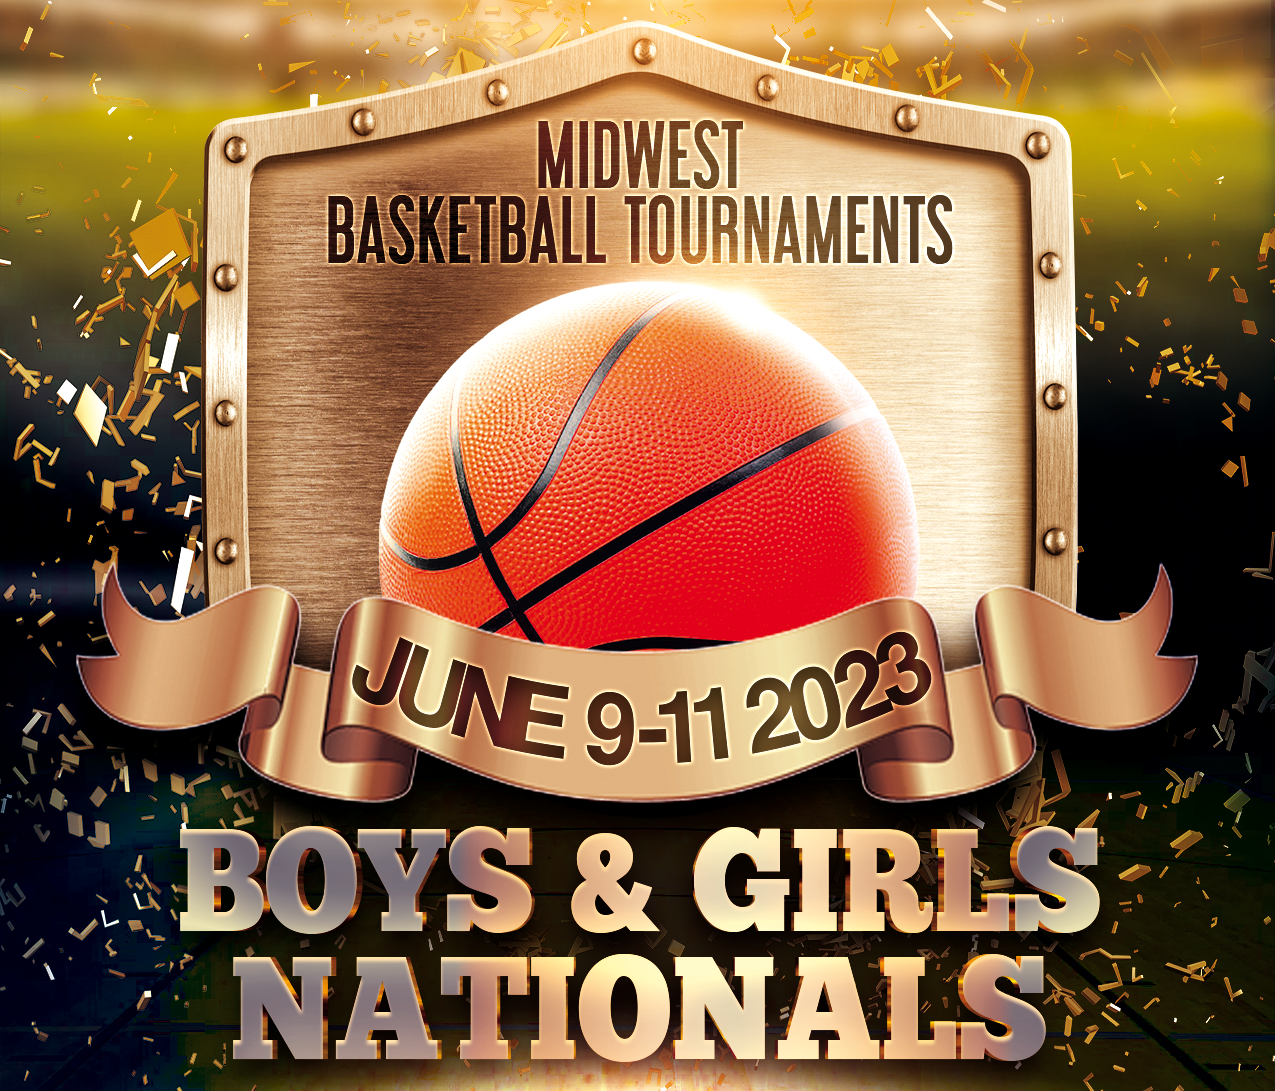 <span style="font-size: 12pt;"><strong><span style="color: #ff6600;"><strong>MBT Nationals<br /></strong>June 10-11, 2023<br /><strong>2nd - 8th Boys & Girls<br /><a href="http://www.midwestbballtournaments.com/ViewEvent.aspx?EID=1034">Click Here for Girls Info<br />Click Here for Boys Info </a></strong></span></strong></span>